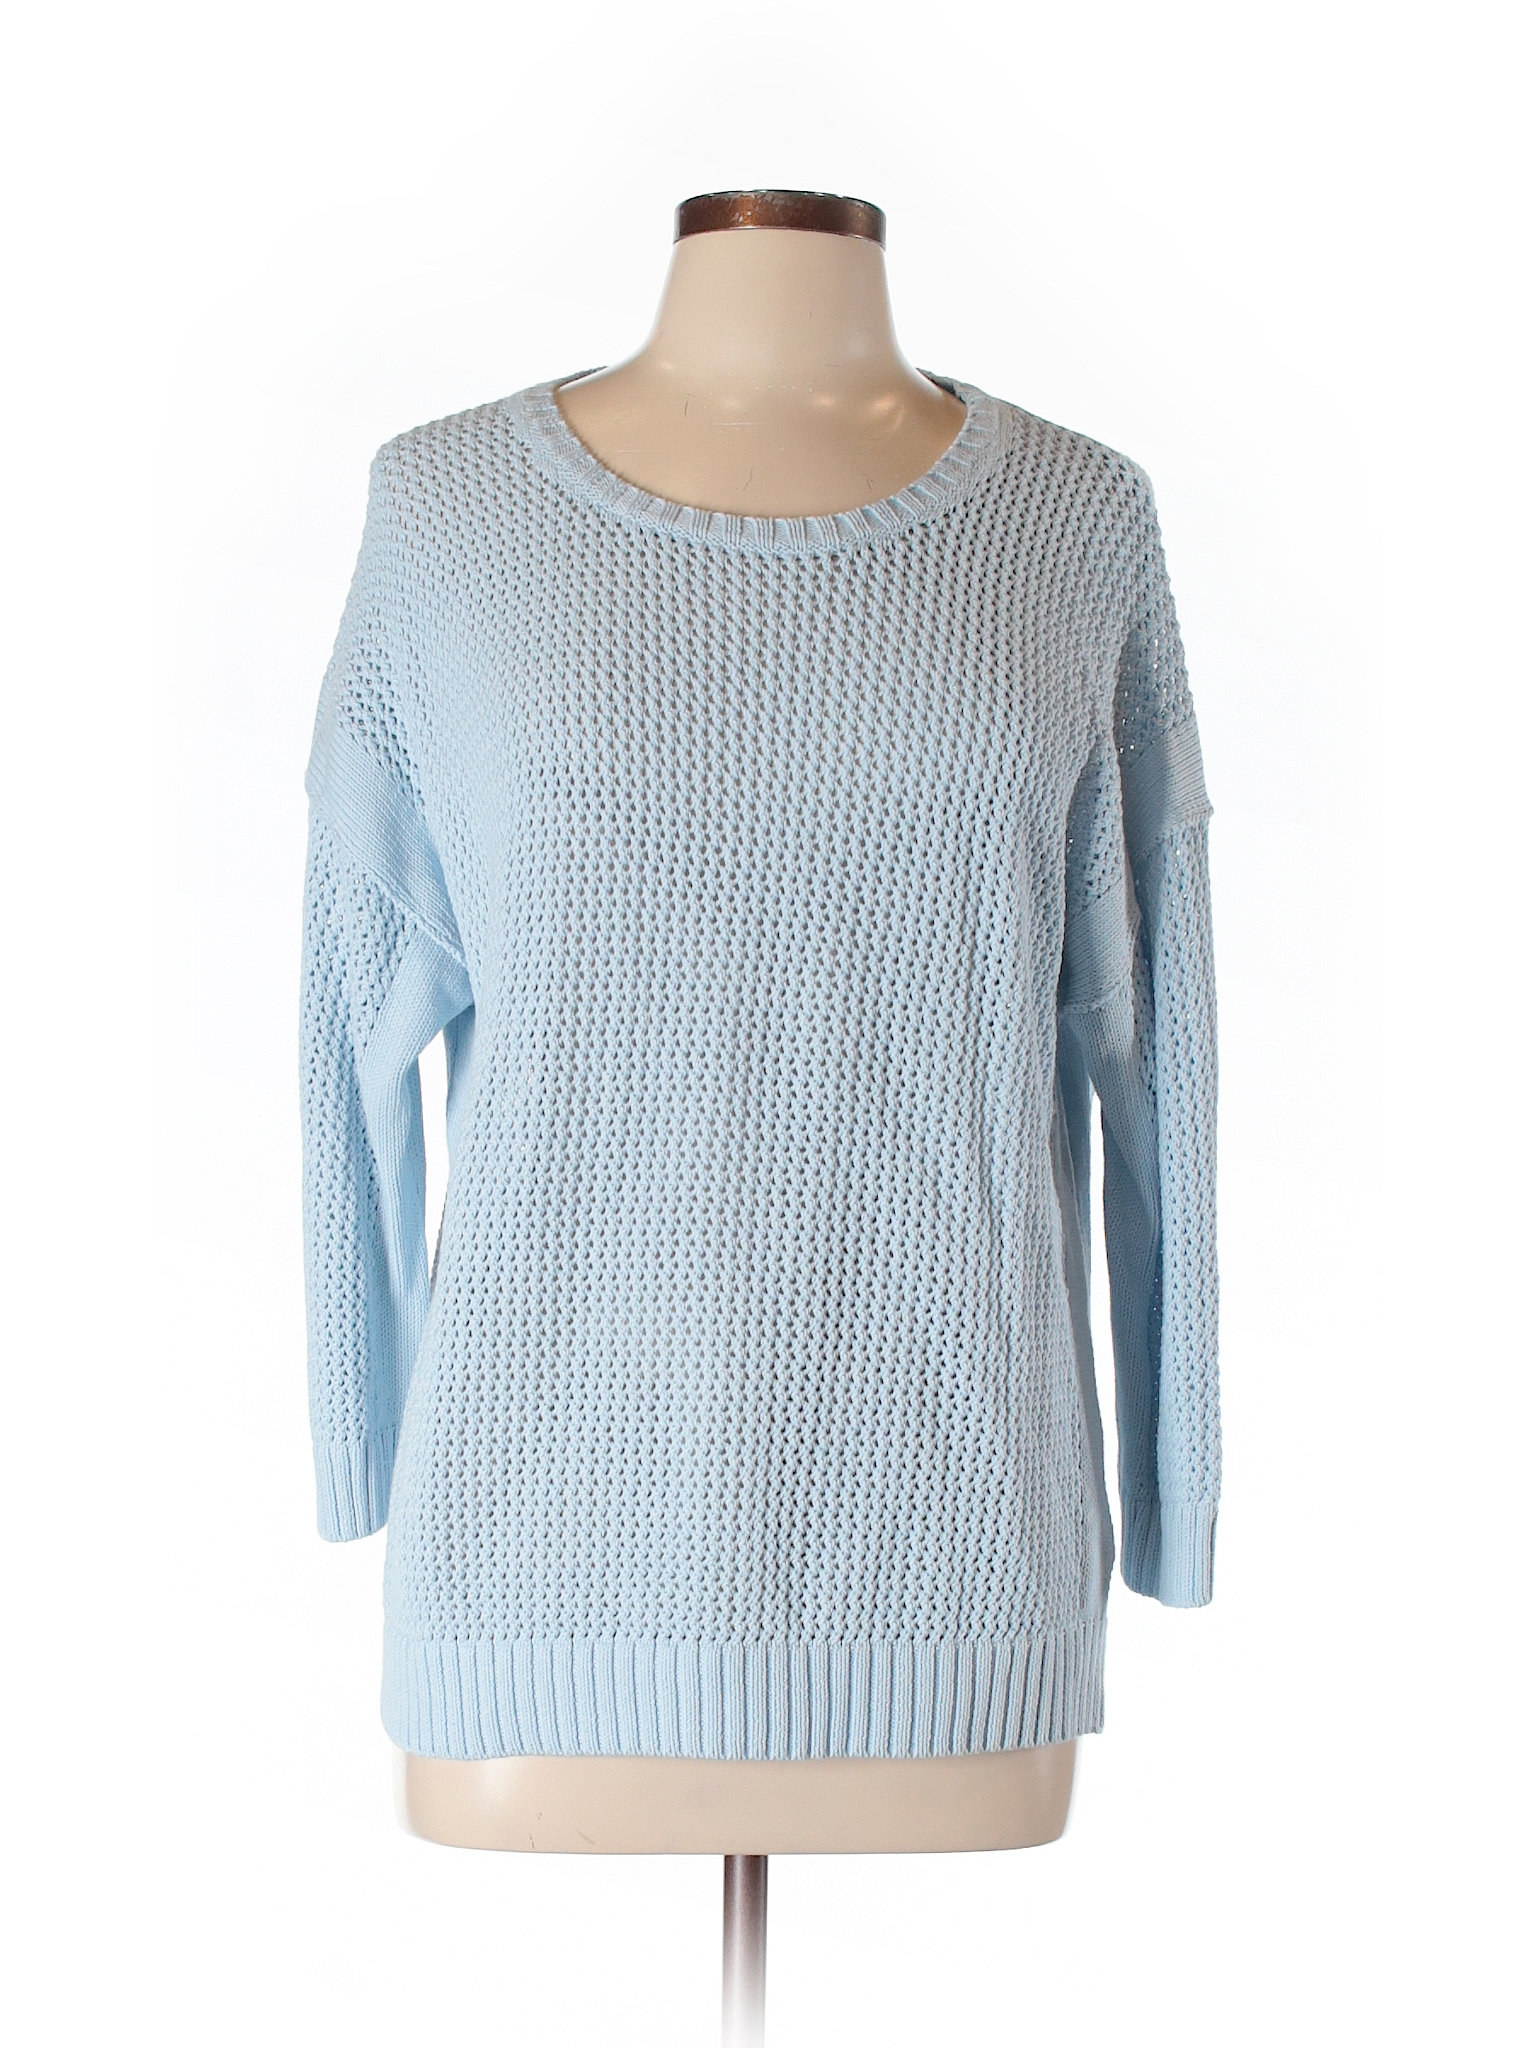 J.Crew Factory Store 100% Cotton Solid Light Blue Pullover Sweater Size ...